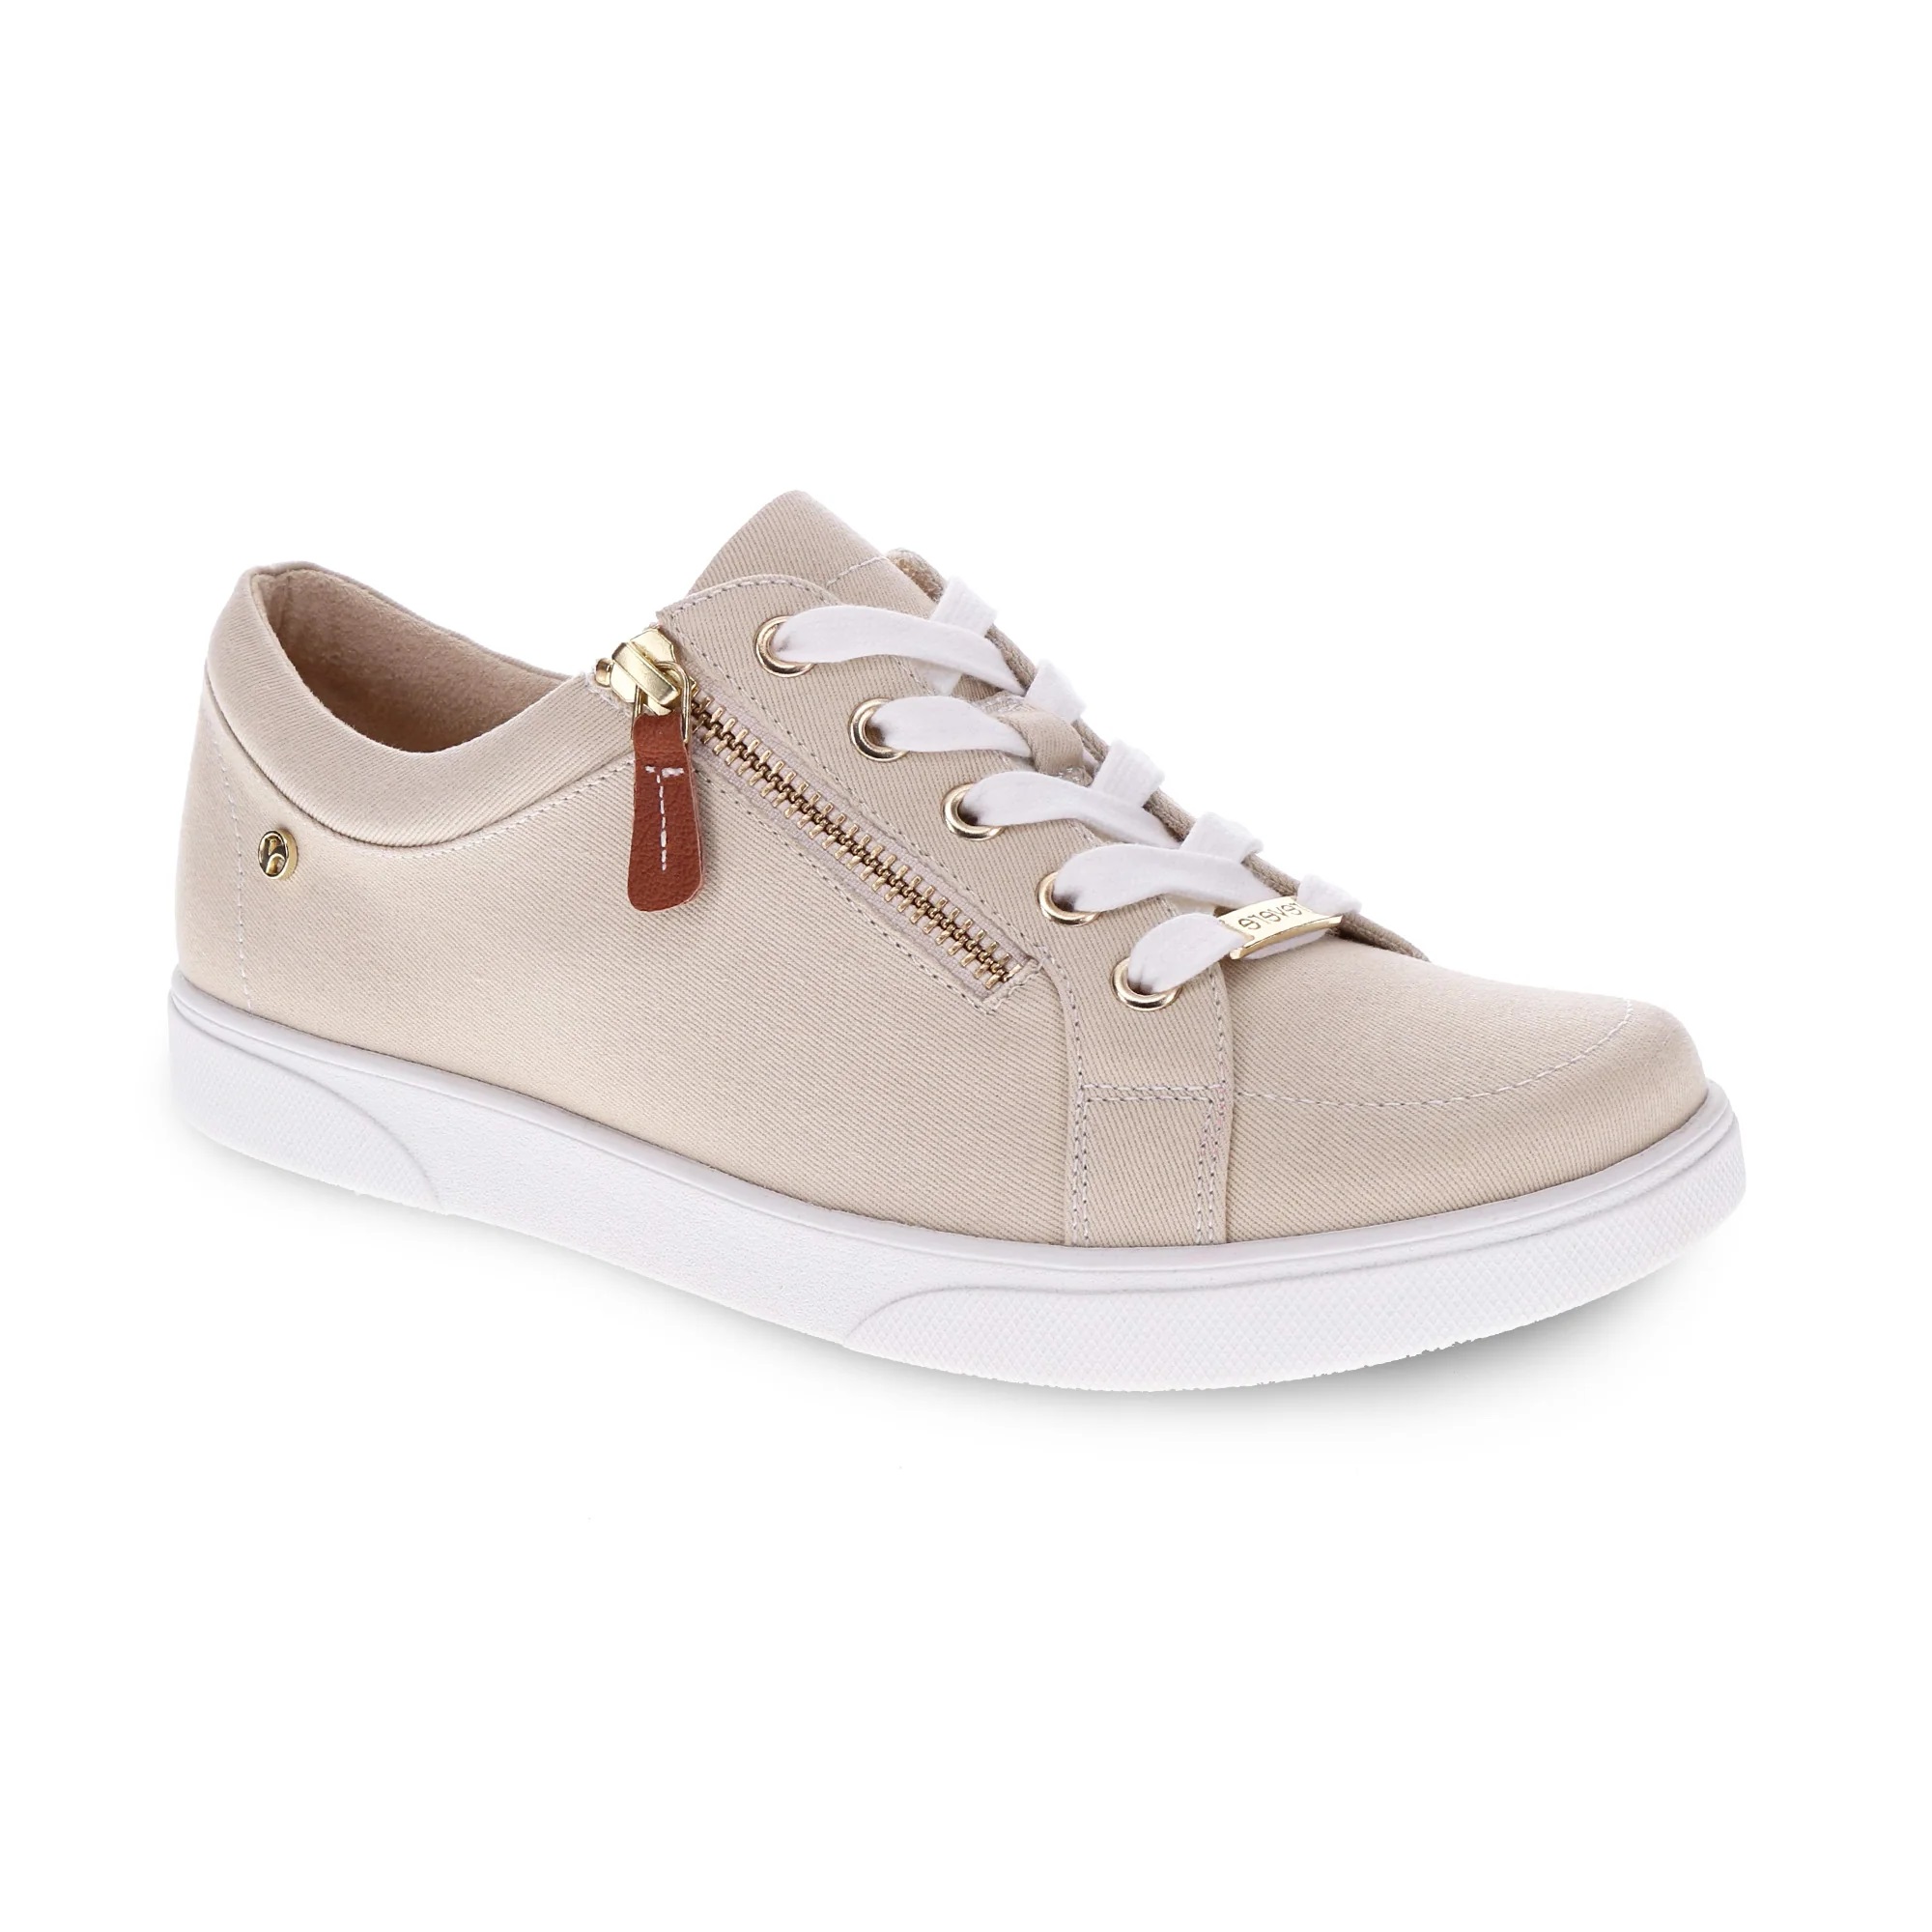 Revere Ripon Women's Canvas Sneaker - Extra Depth With Removable Footbeds - Wide